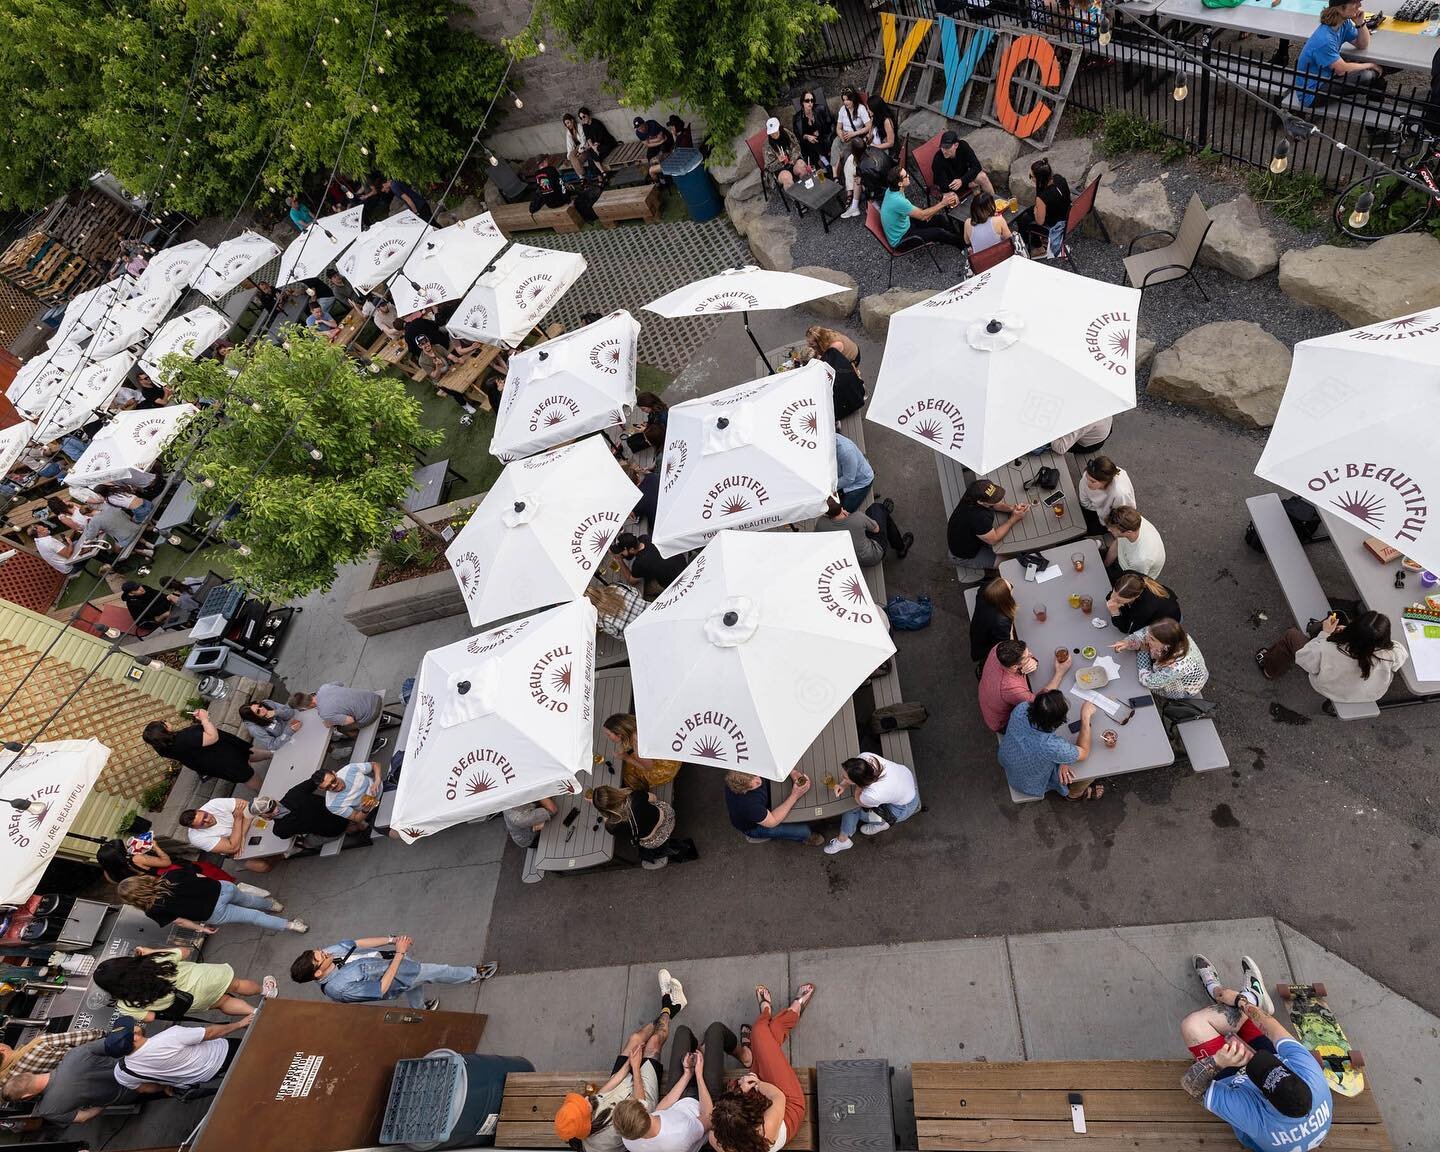 SPRING HAS SPRUNG

We know cooler temps might return but we&rsquo;re living in the moment, okay?! 

Our patio is full of seats for you to soak up the sunshine while sipping beer and eating tacos this weekend!

We can&rsquo;t wait for summer and and a